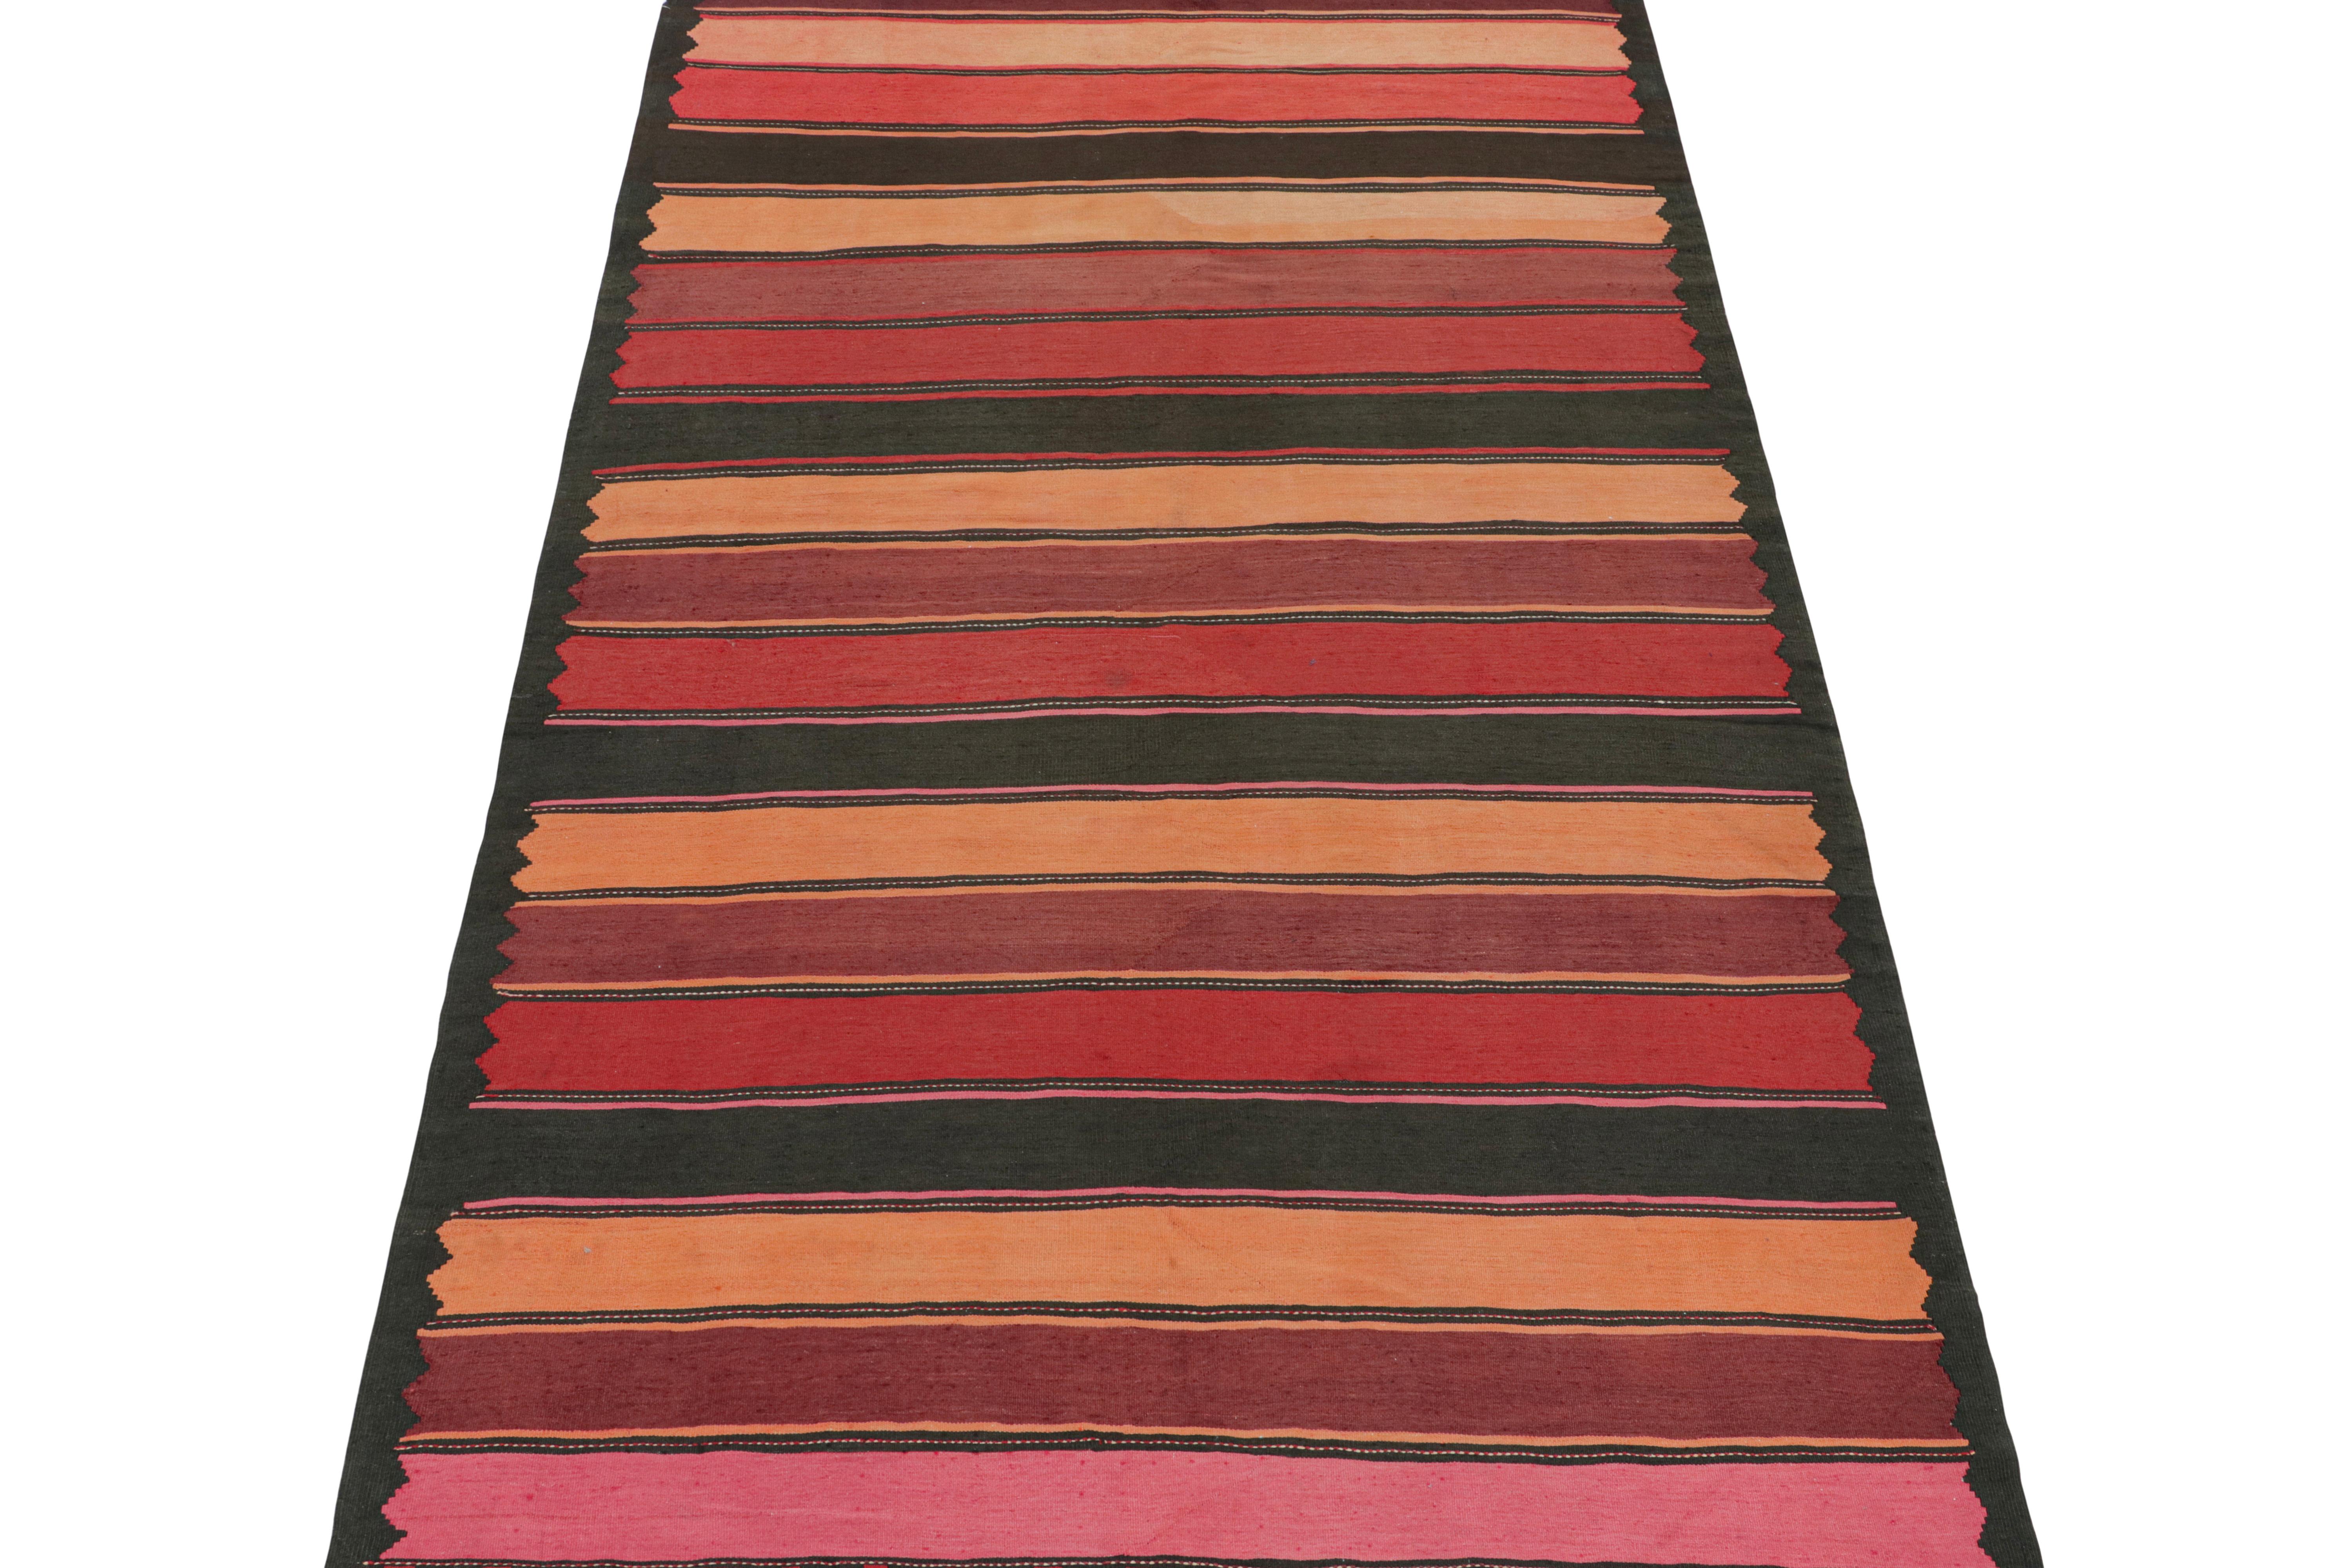 This vintage 7x12 Persian Kilim is believed to be a tribal Karadagh rug. Handwoven in wool, it originates circa 1940-1950 from the mountainous region of that name known for its craft.

Further on the Design:

The design favors wide stripes in